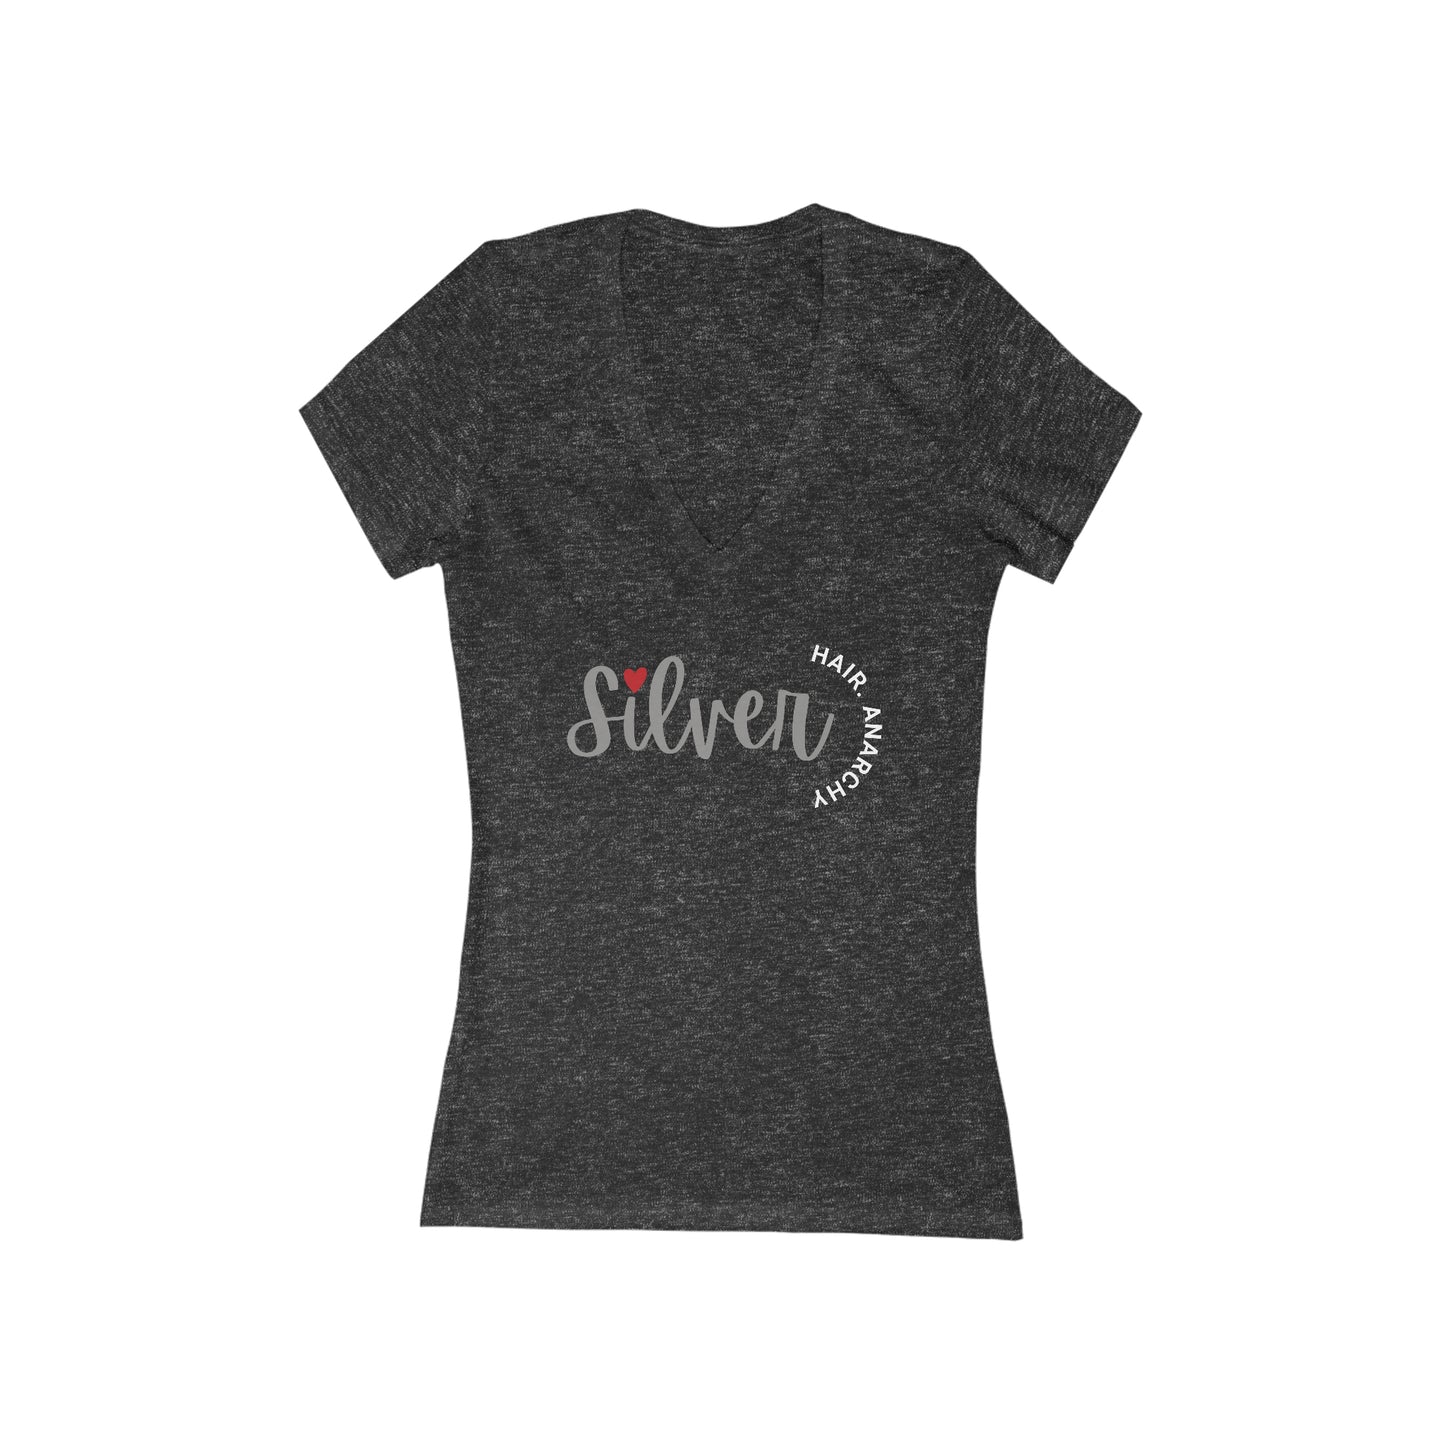 SILVER Hair Anarchy, short sleeve deep v-neck t-shirt, for women embracing silver and gray hair